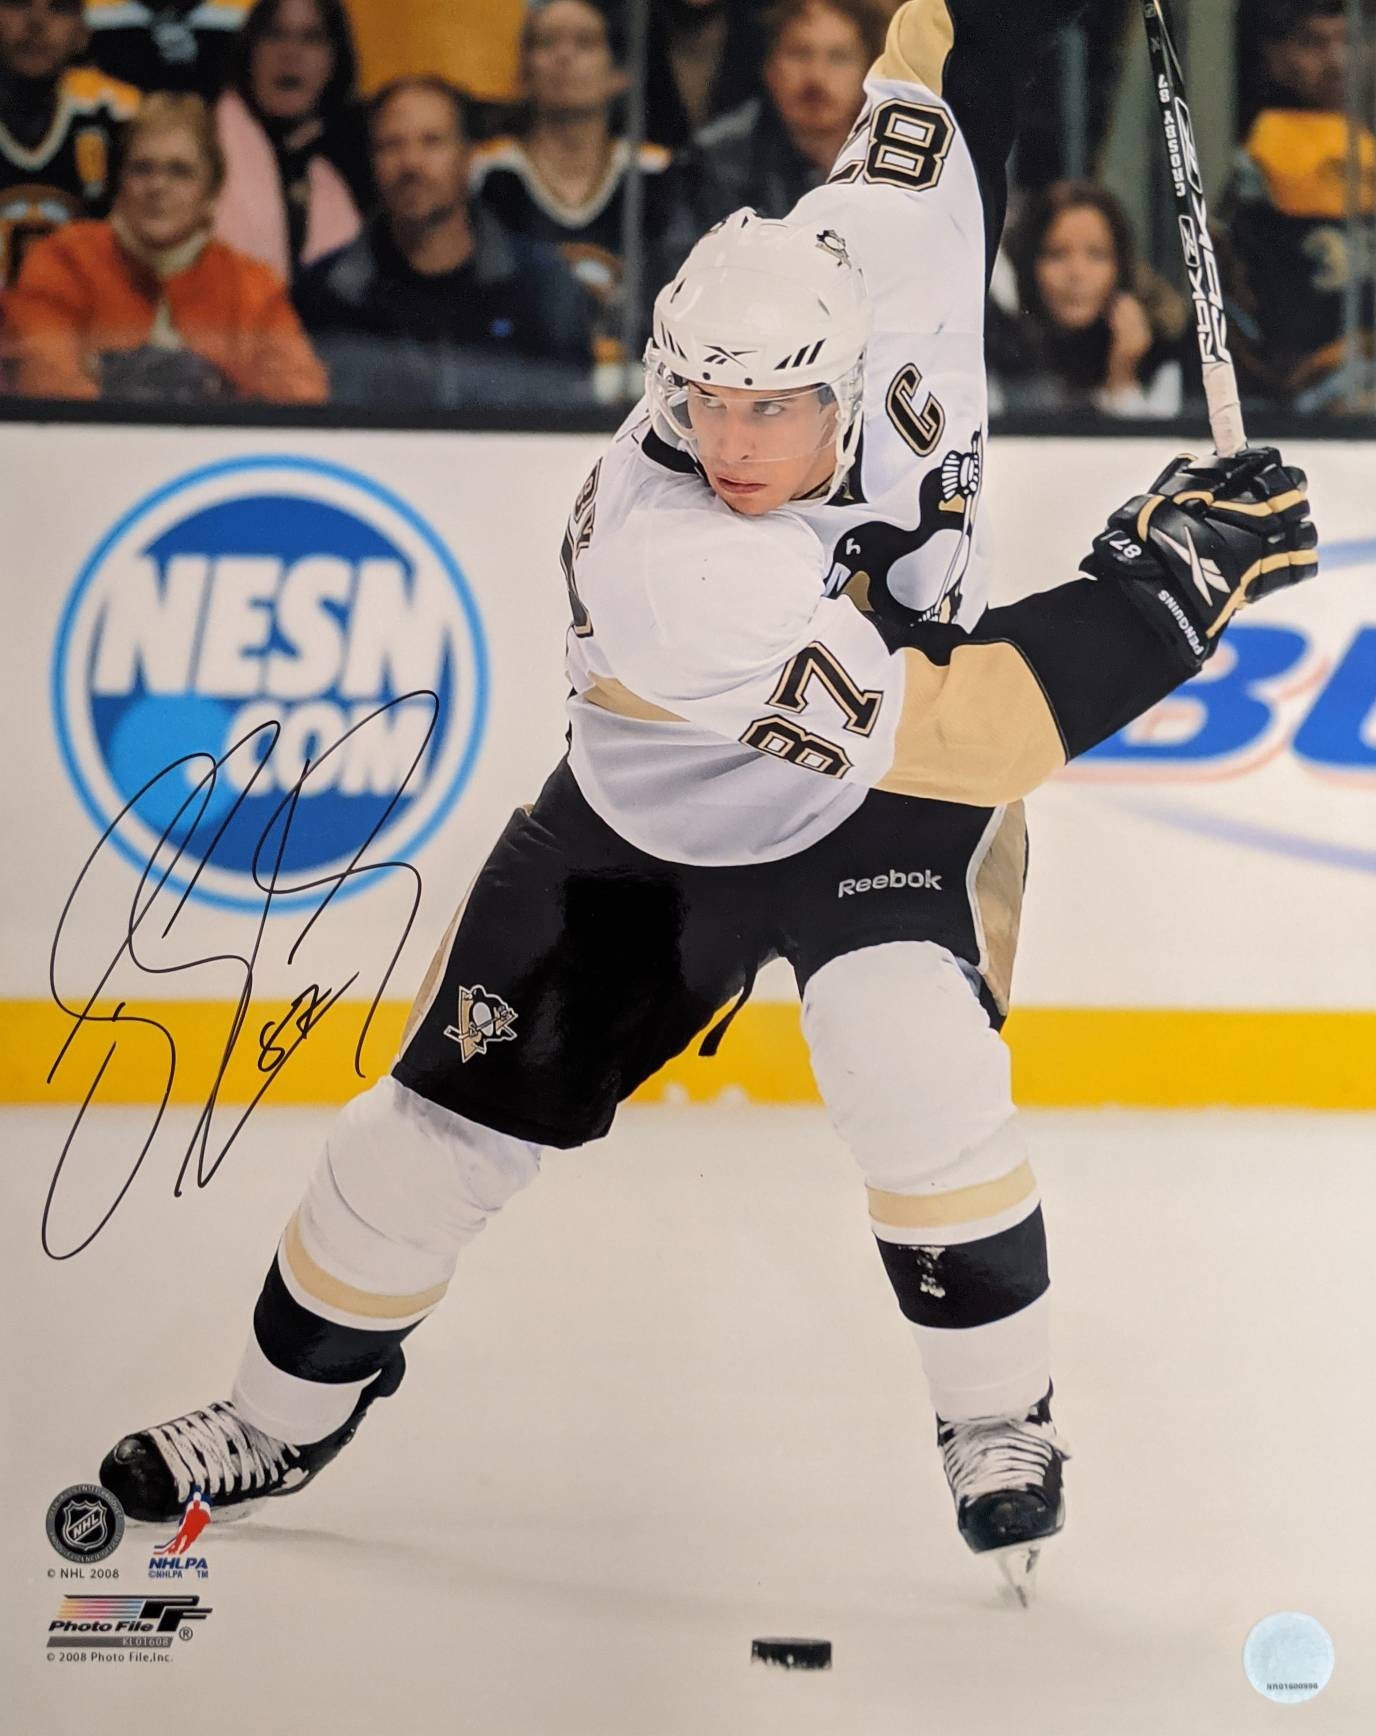 Sidney Crosby Signed Pittsburgh Penguins Photograph - The Autograph Source